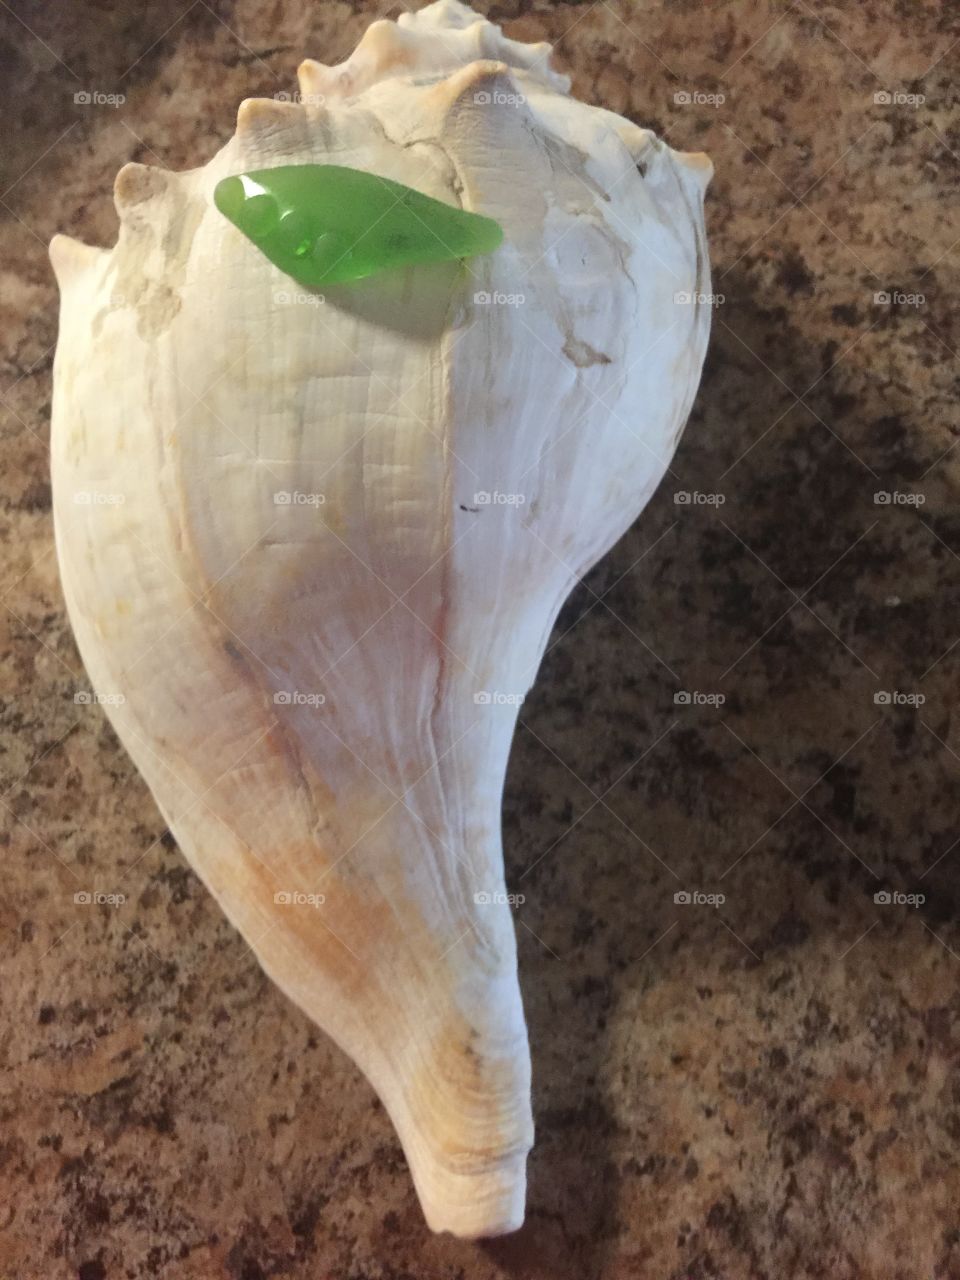 Beautiful lime green Seaglass on a whelk shell I found in Wildwood NJ Seaglass was found in East Point NJ